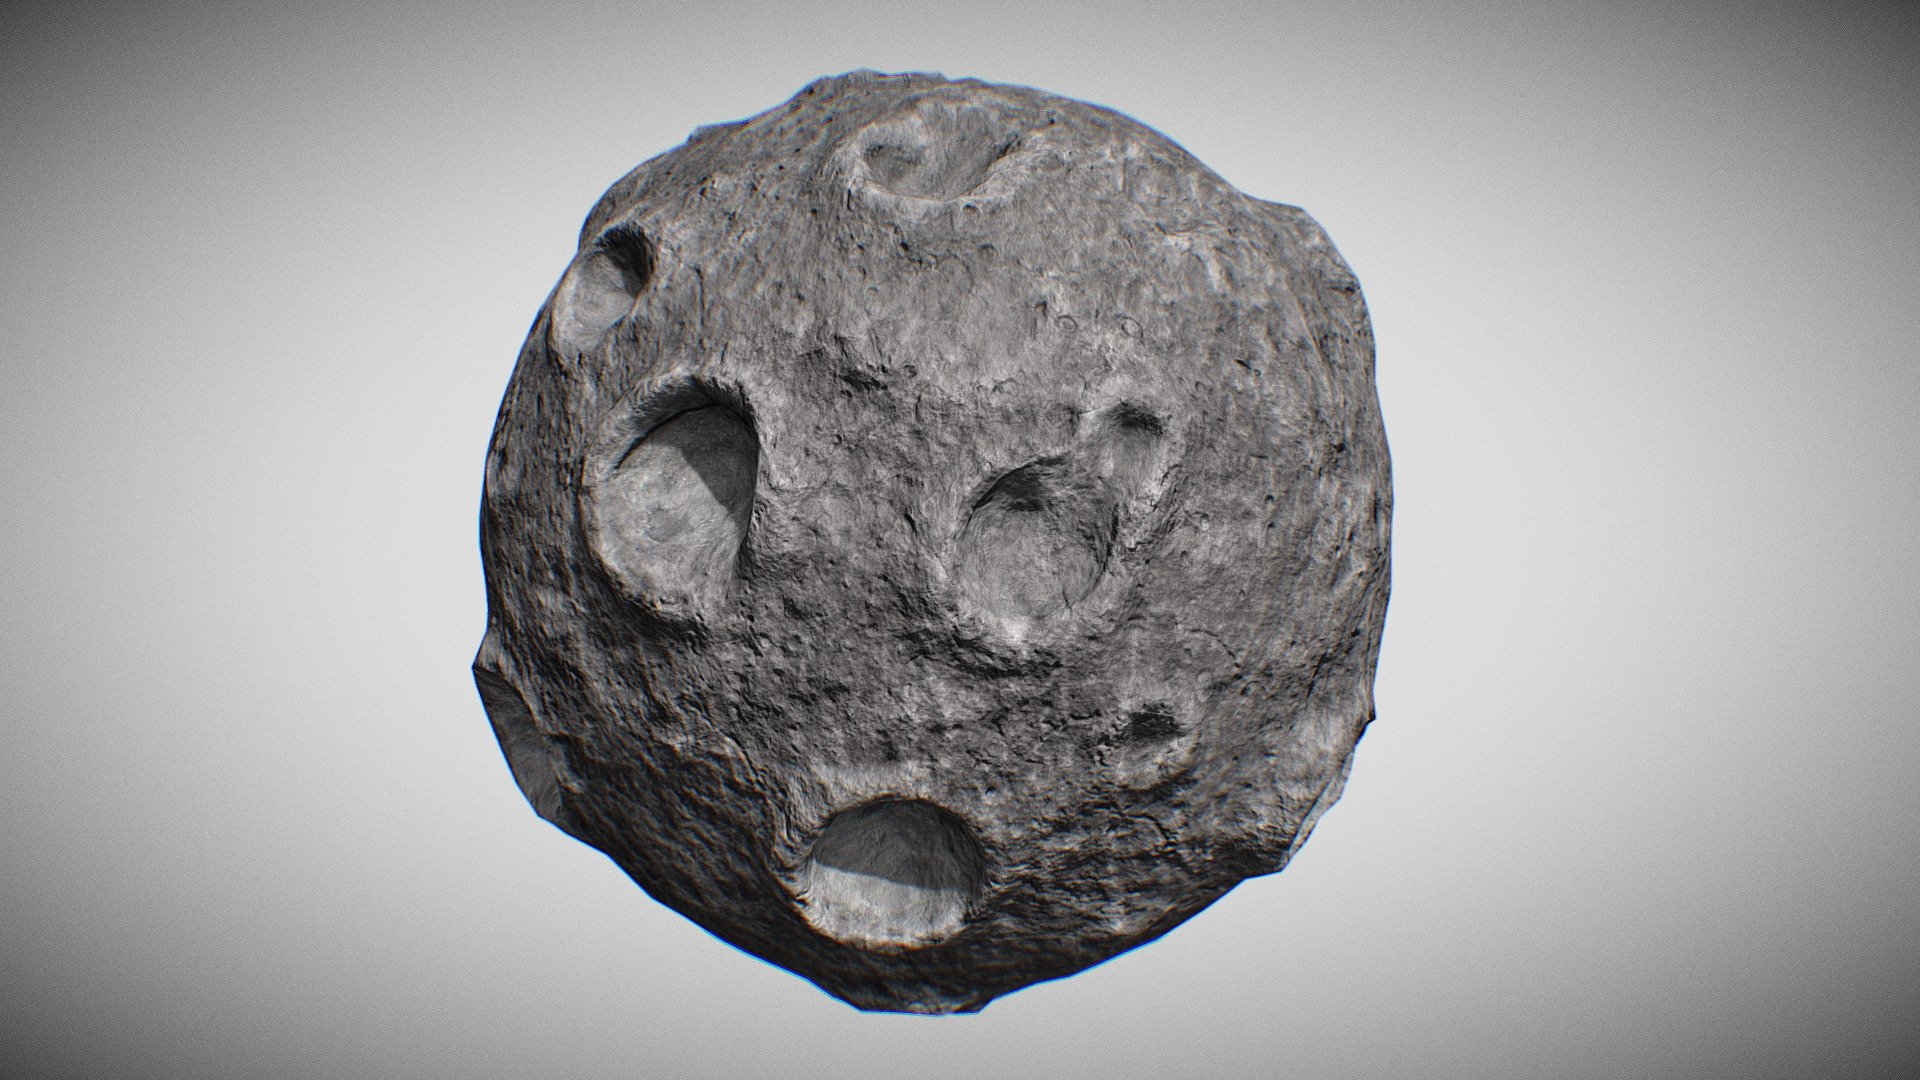 Low-poly PBR Cartoon Moon model intended for game/realtime/background use.






Model was not intended for subdivision

Real World Scale Measurements

No special plug-ins necessary to use this product 

Quad only polygon - 3241 count 

Texel density is 8.71 for 4k UV-maps. Diameter = 2 meters



Model is included in 4 file formats (Include only geometry with uvs, and texture need add manually)




Maya 2019 

FBX 

OBJ 

GLTF/GLB 2k and 4k file



High quality 4096x4096 resolution textures in PNG:





PBR Maps:
BaseColor, 
AO, 
Roughness, 
Metalness, 
Normal, 
Glossiness, 
Specular. 




Unity maps (+HDRP maps):
Diffuse, 
Normal map, 
MetallicSmoothness,
HDRP mask map.




Unreal Engine 4 maps:
BaseColor, 
Normal, 
OcclusionRoughnessMetallic.


 - Cartoon Moon PBR - Buy Royalty Free 3D model by en3my71 3d model